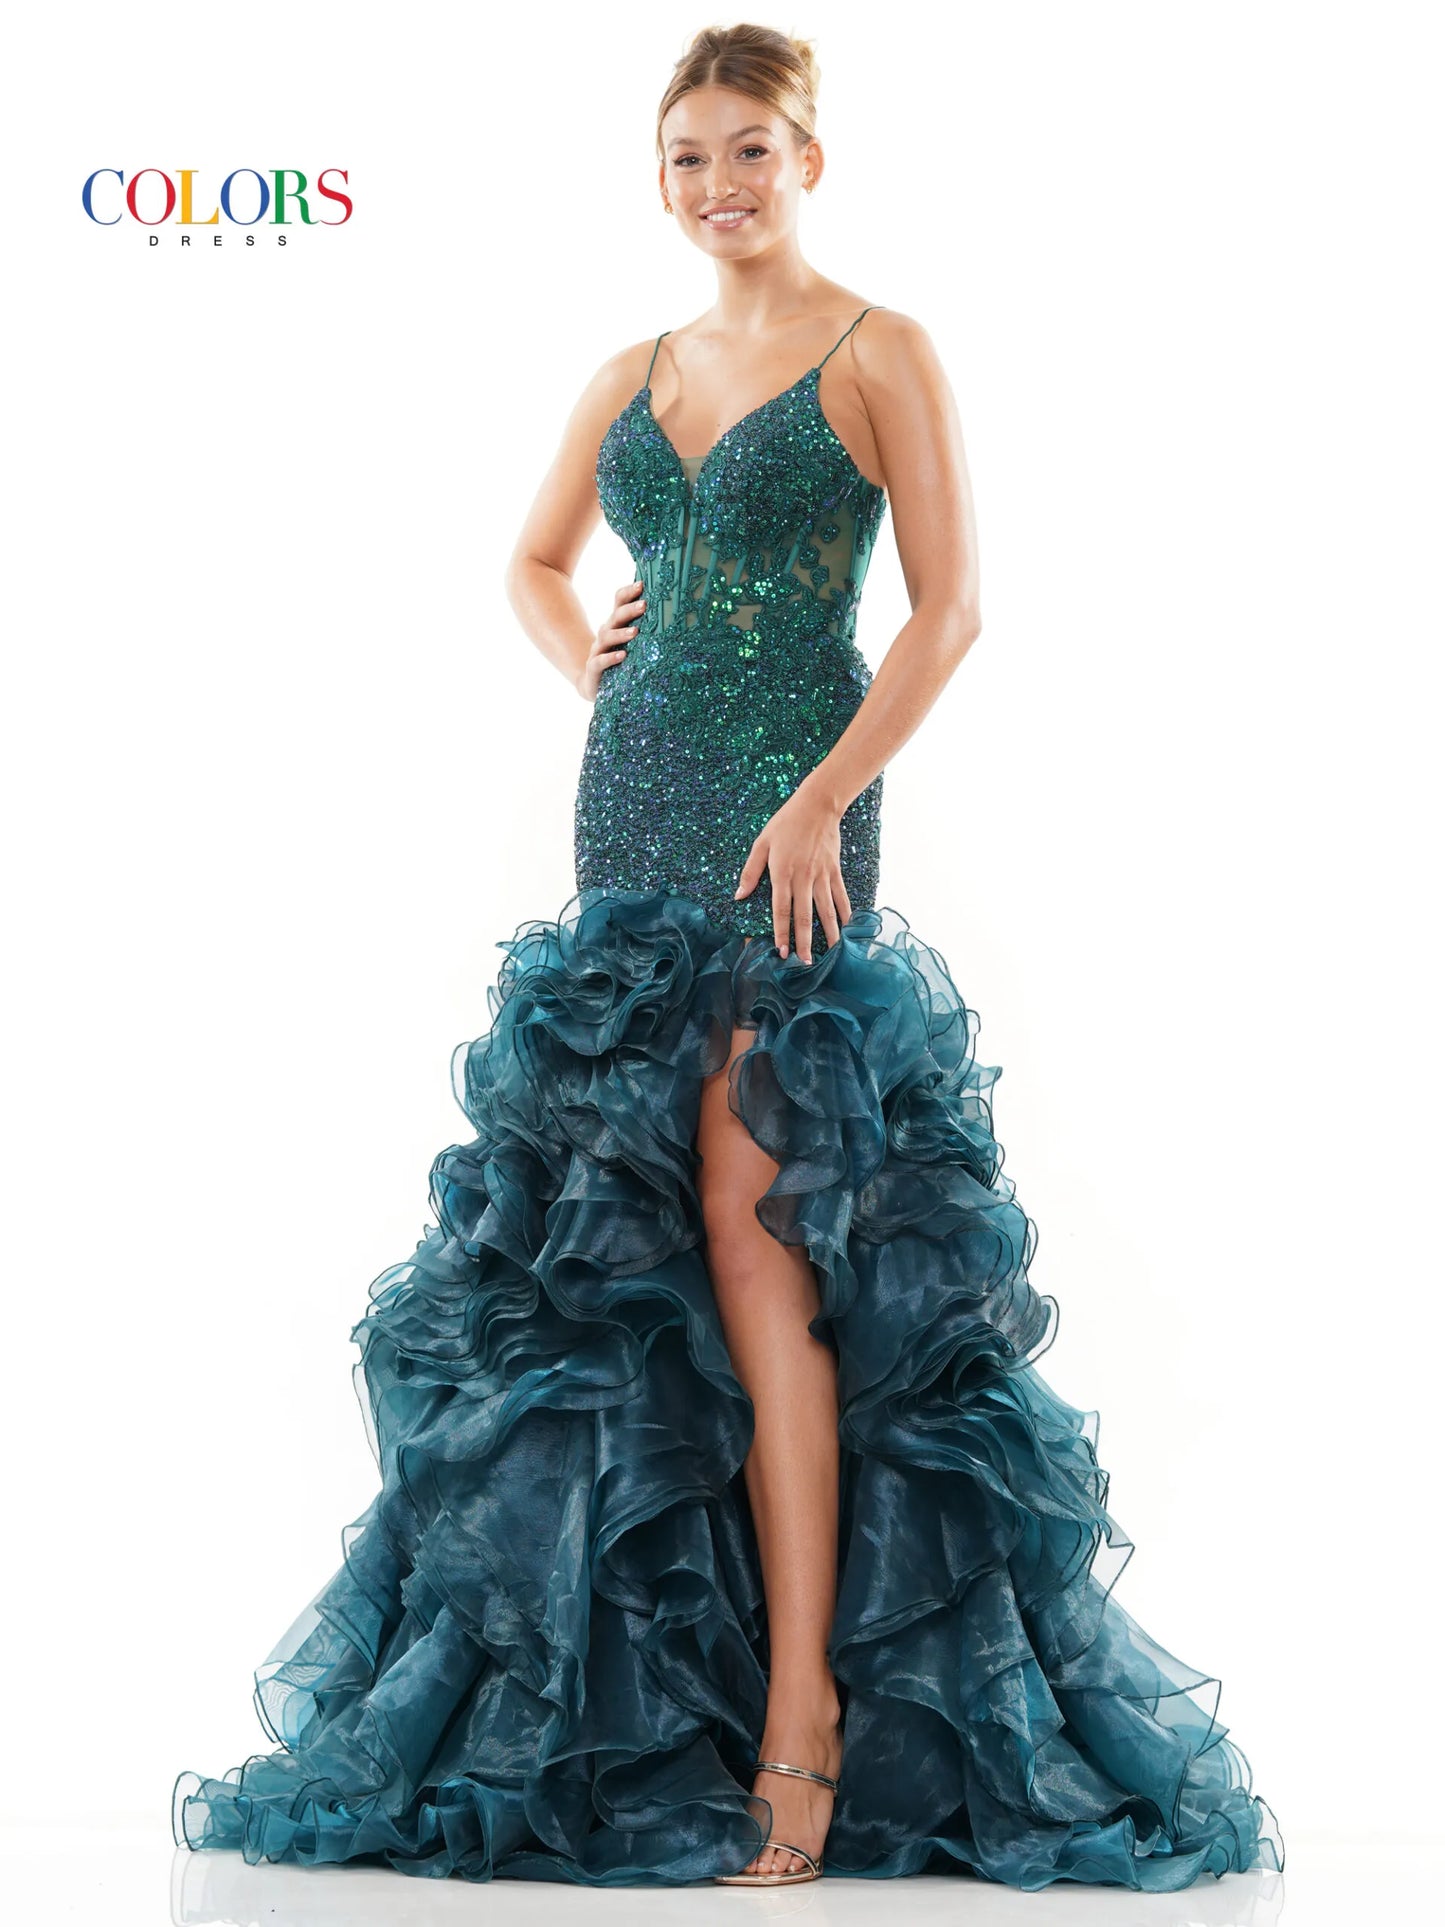 Expertly designed with a lace and sequin embellished sheer corset, this Colors Dress 3214 Layer Ruffle Mermaid Prom Dress features an elegant high slit and sweeping train. Its intricate details and form-flattering silhouette make it the perfect choice for a glamorous and sophisticated evening look. lace up corset back.  Sizes: 0-22  Colors: Black, Red, Blue, Deep Green